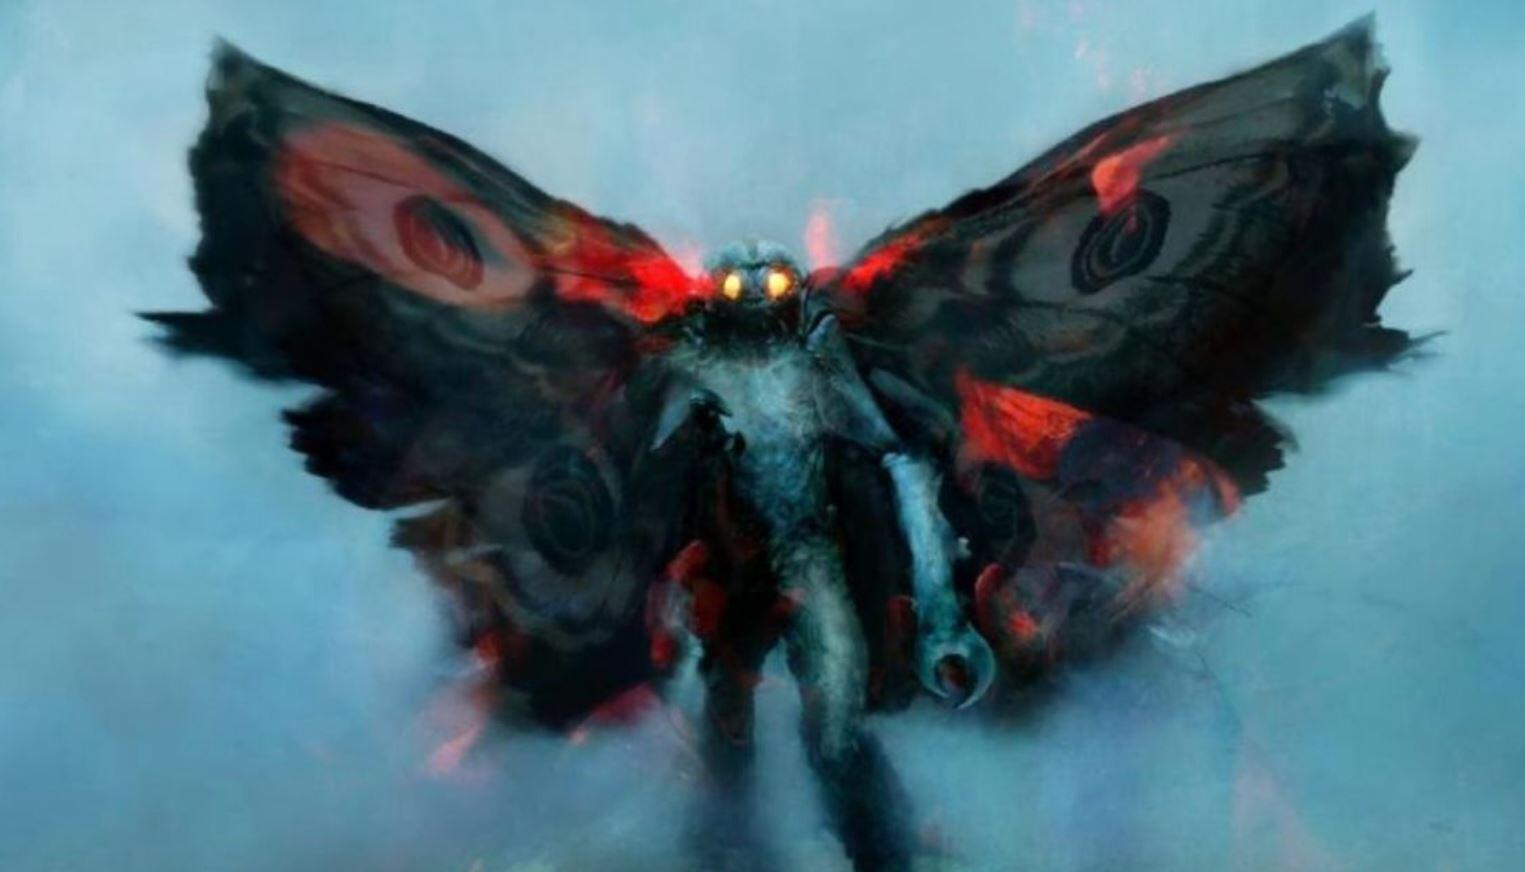 'The Mothman Legacy' Documentary Trailer Looks At The Reality Of The Mothman1525 x 872